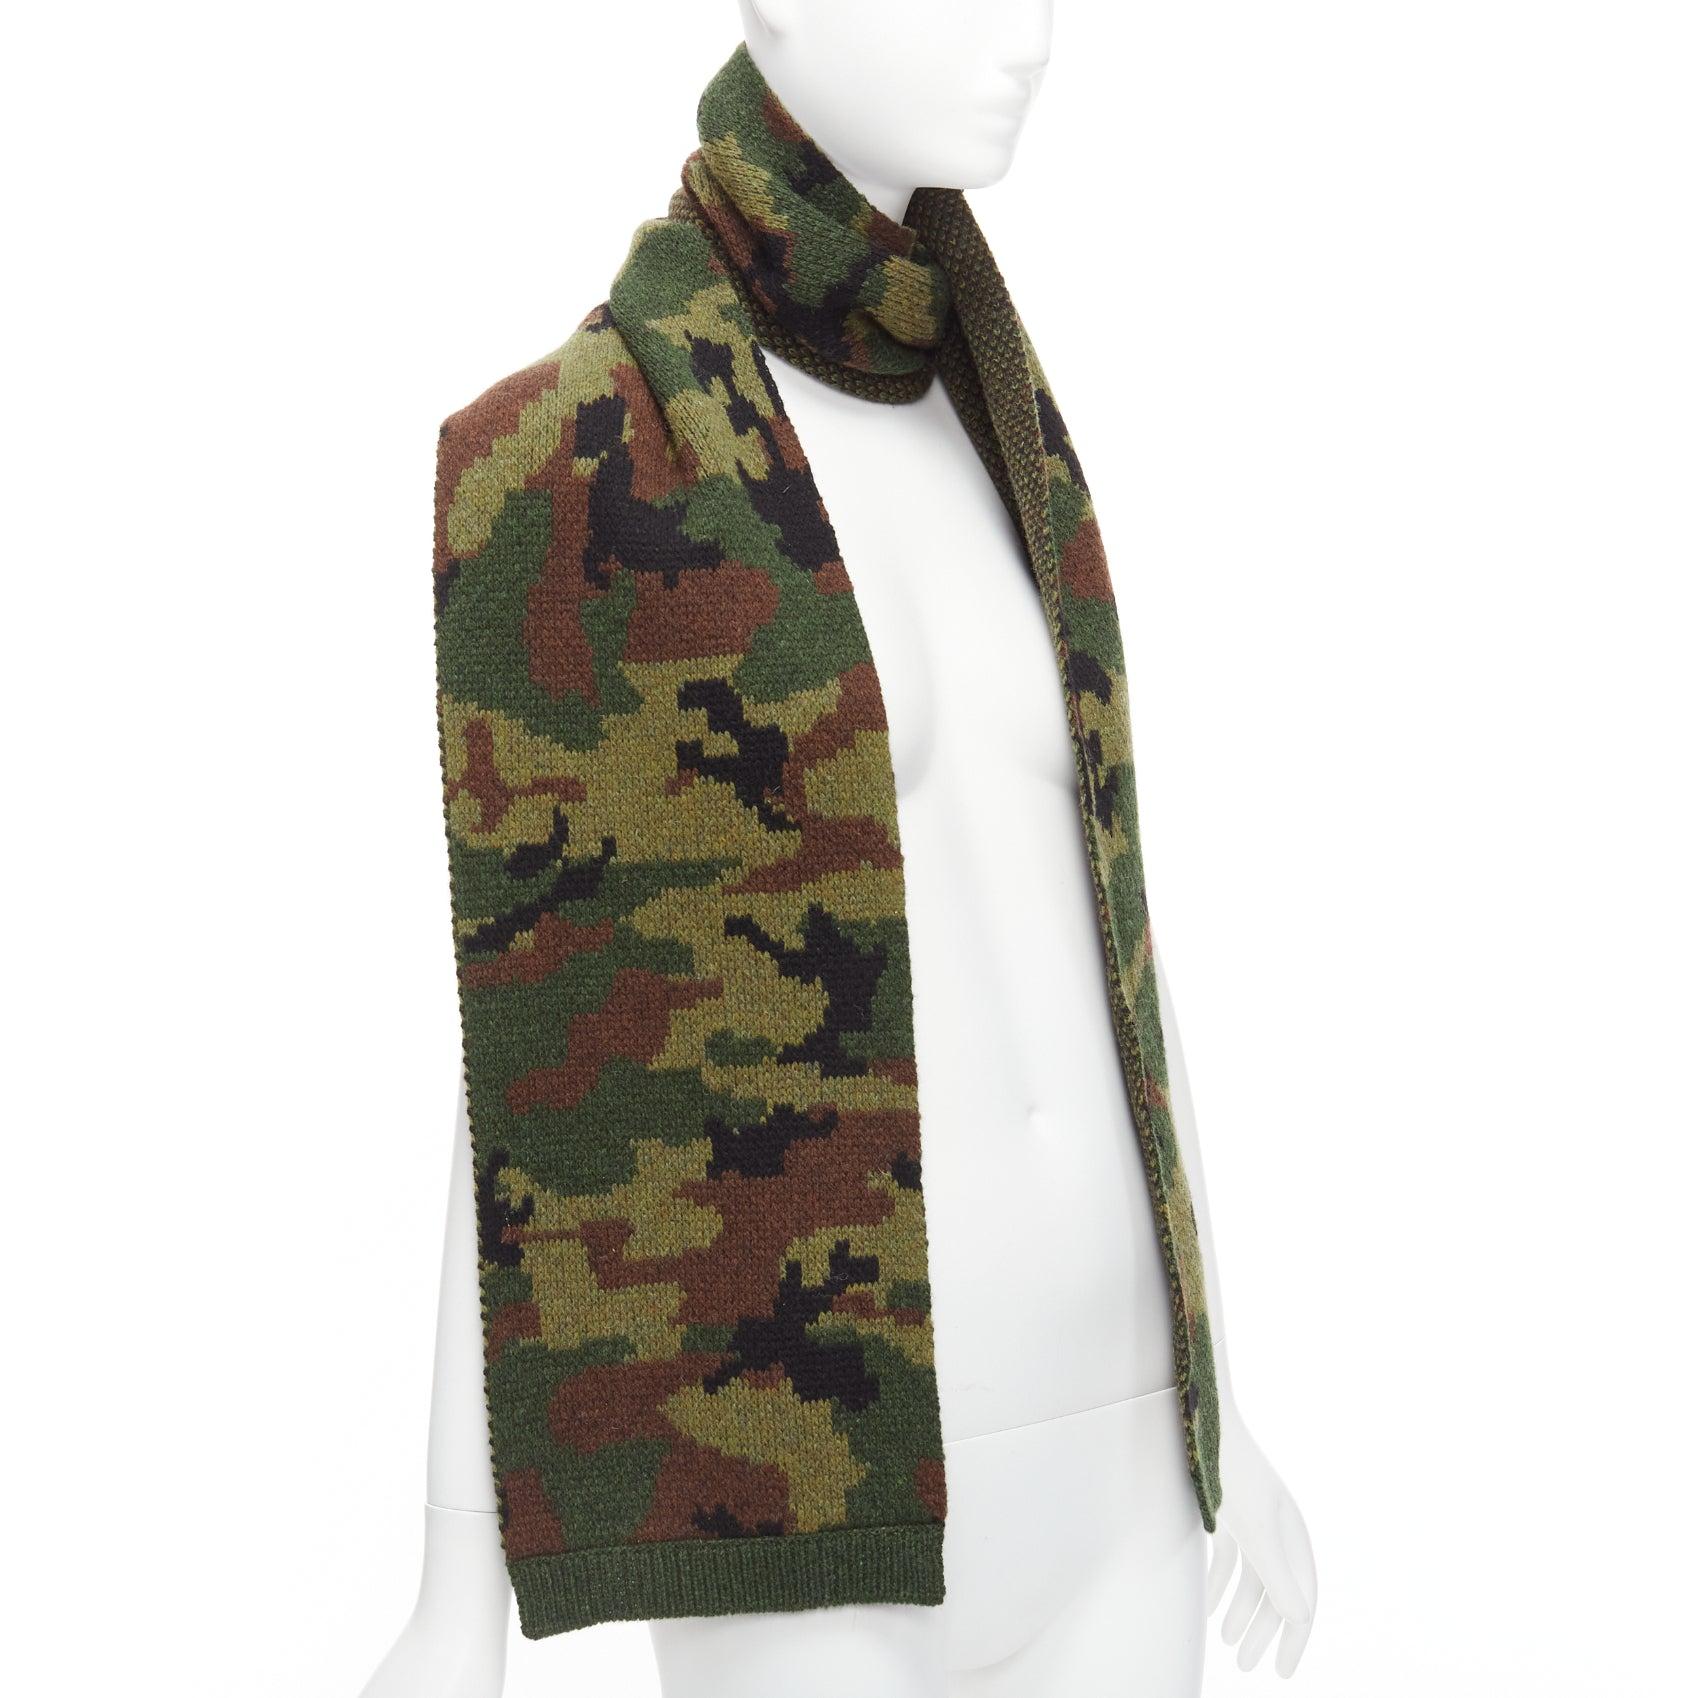 MIU MIU 2019 100% virgin woo green brown camouflage jacquard long scarf
Reference: AAWC/A00560
Brand: Miu Miu
Collection: 2019
Material: Virgin Wool
Color: Green, Brown
Pattern: Camouflage
Extra Details: Speckled knit pattern on the wrong side.
Made